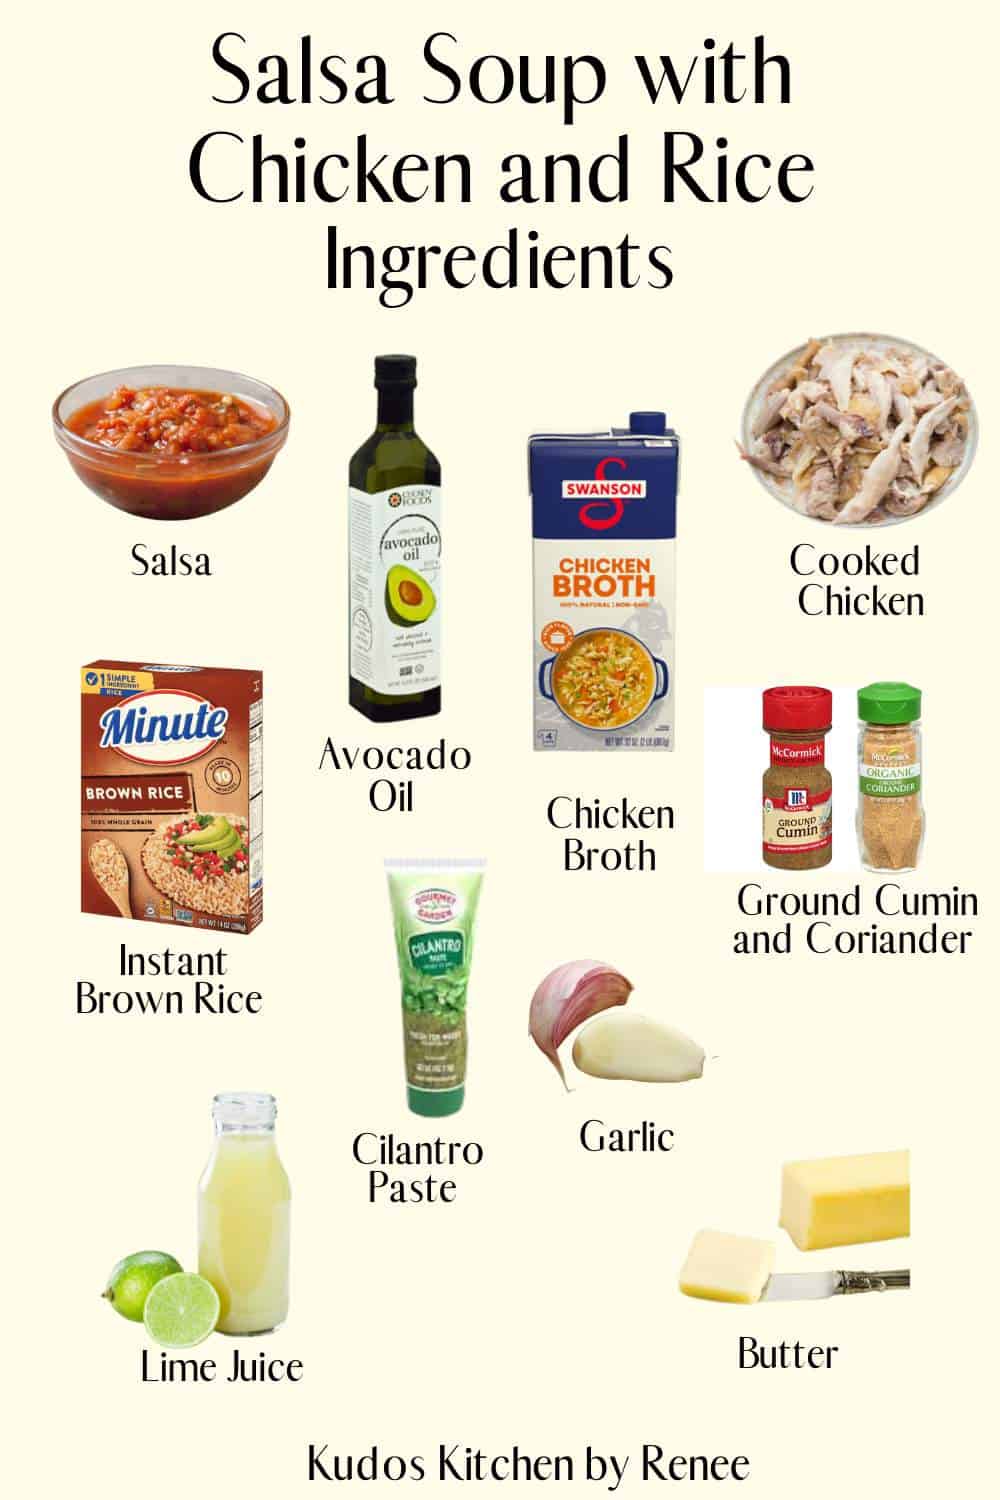 Visual ingredient list for how to make Salsa Soup.